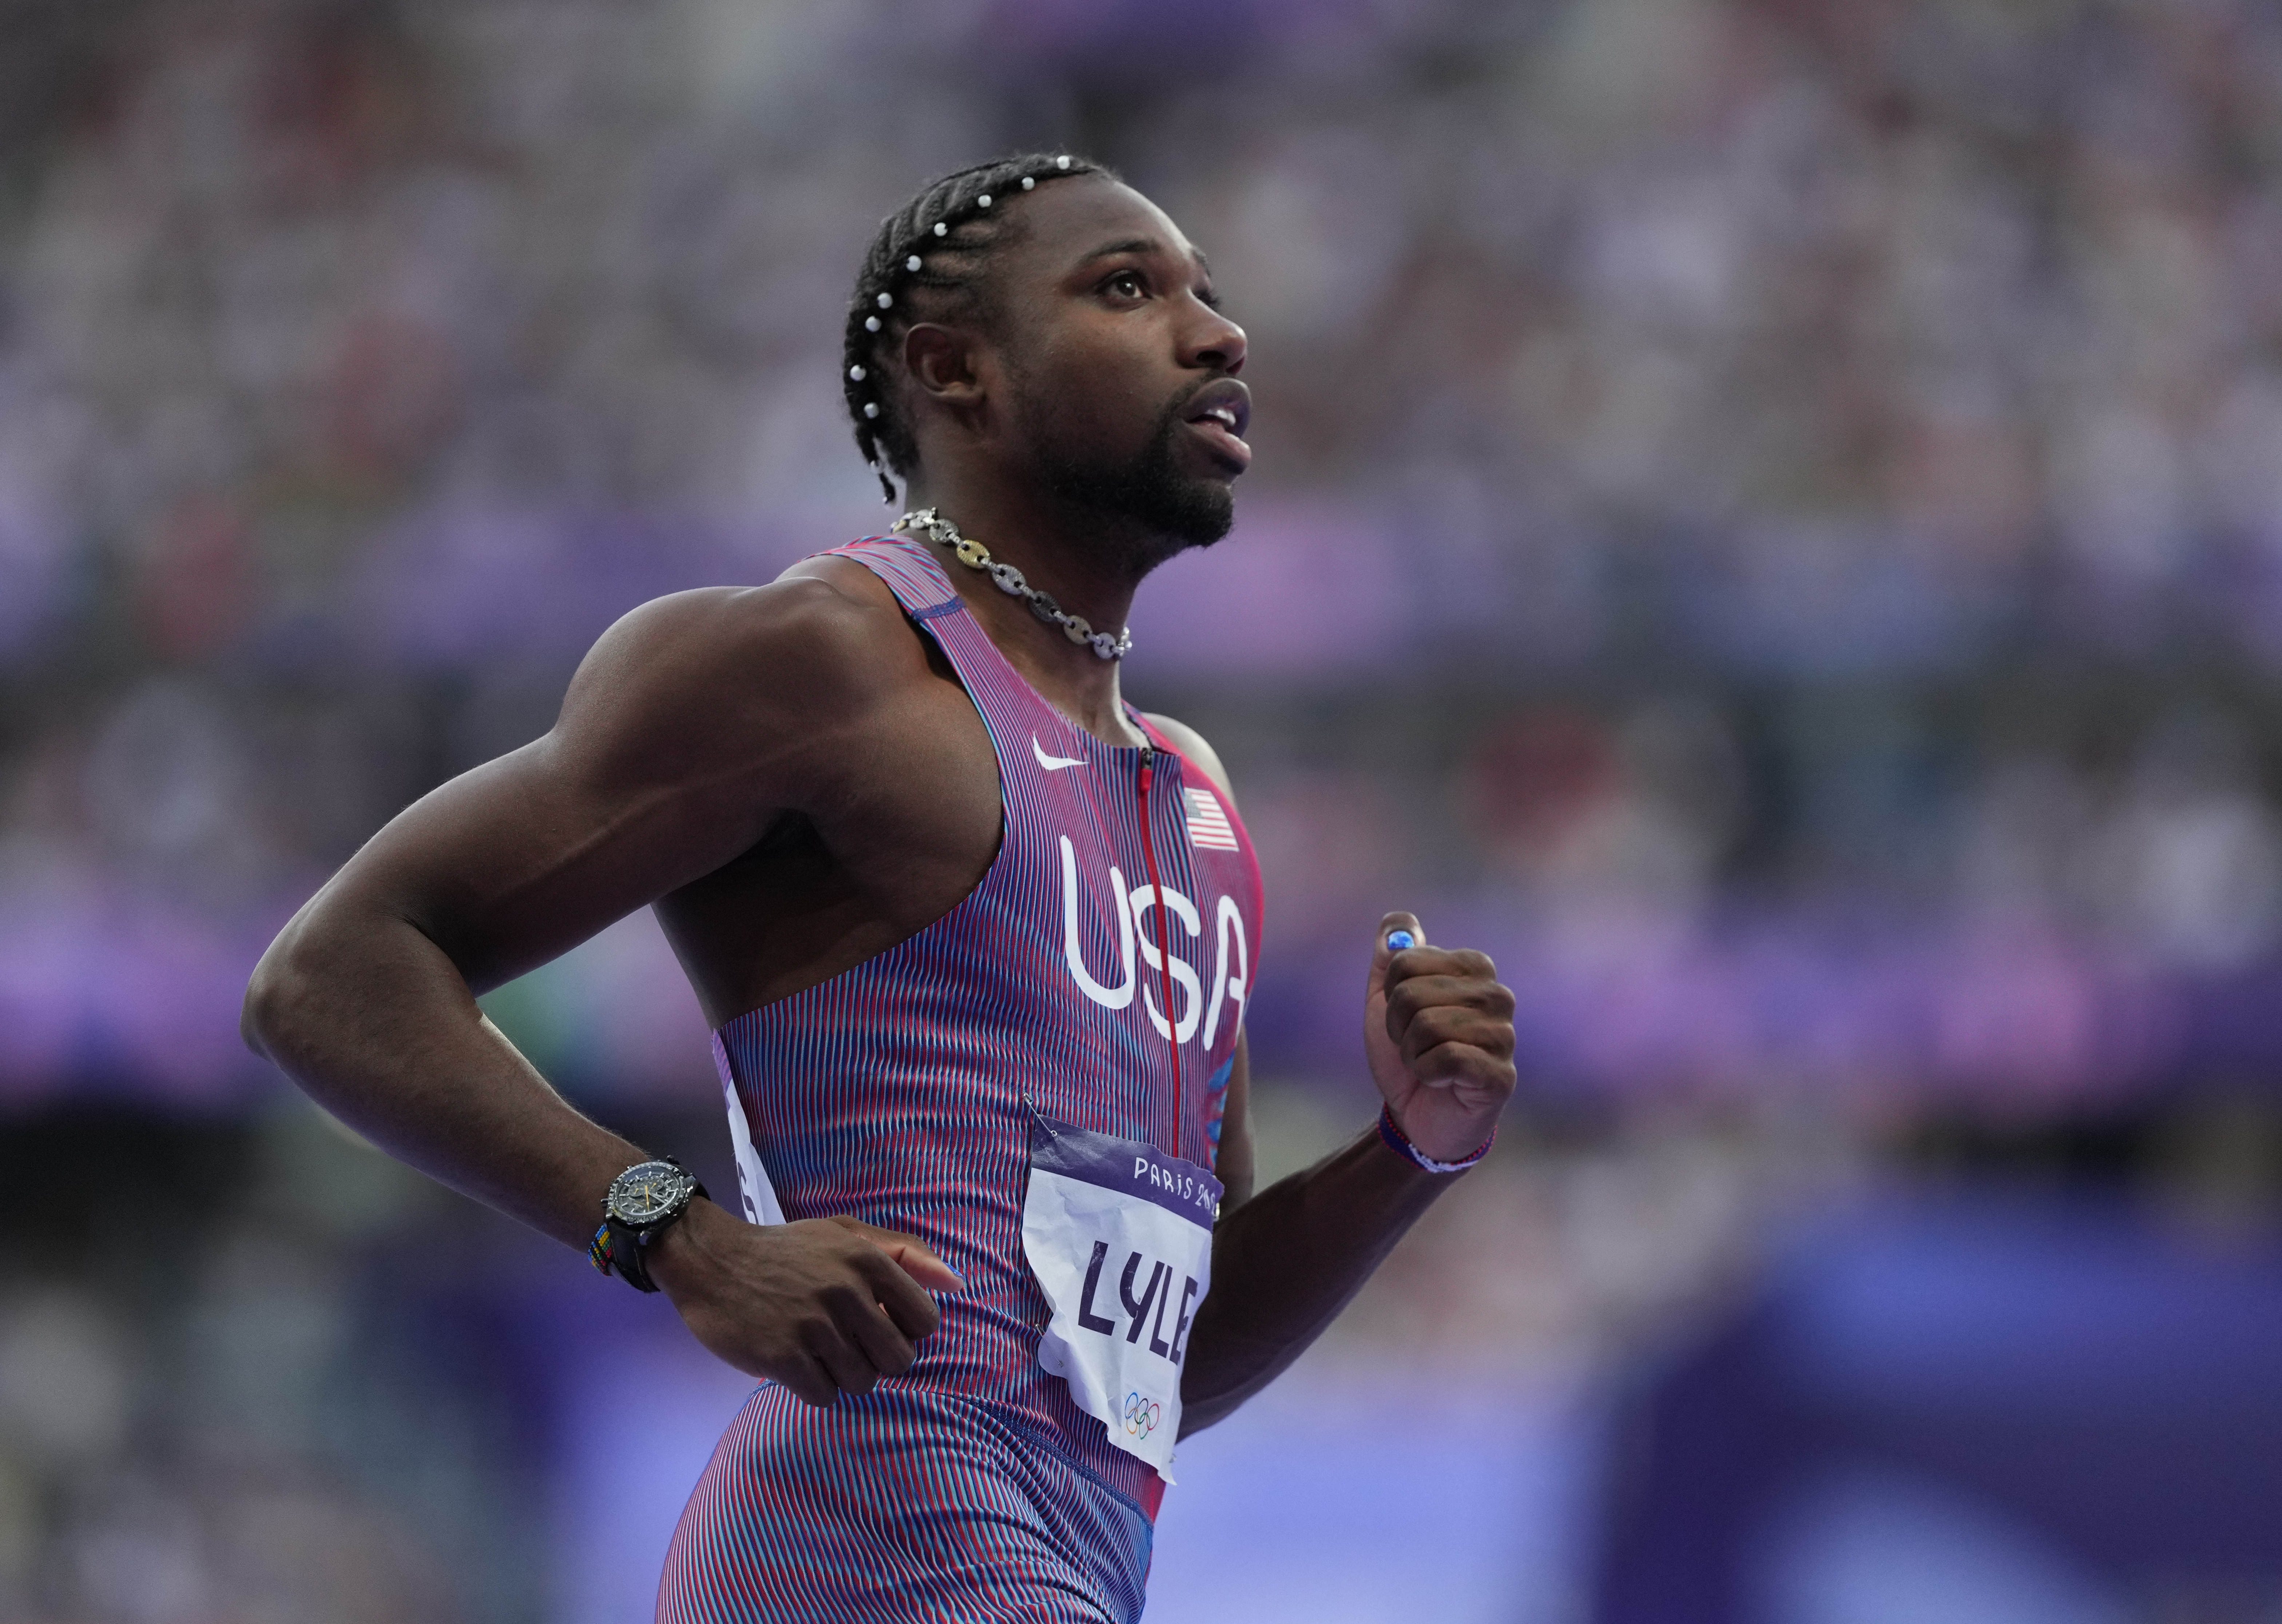 Men's 100m final results: Noah Lyles wins gold in photo finish at 2024 Paris Olympics